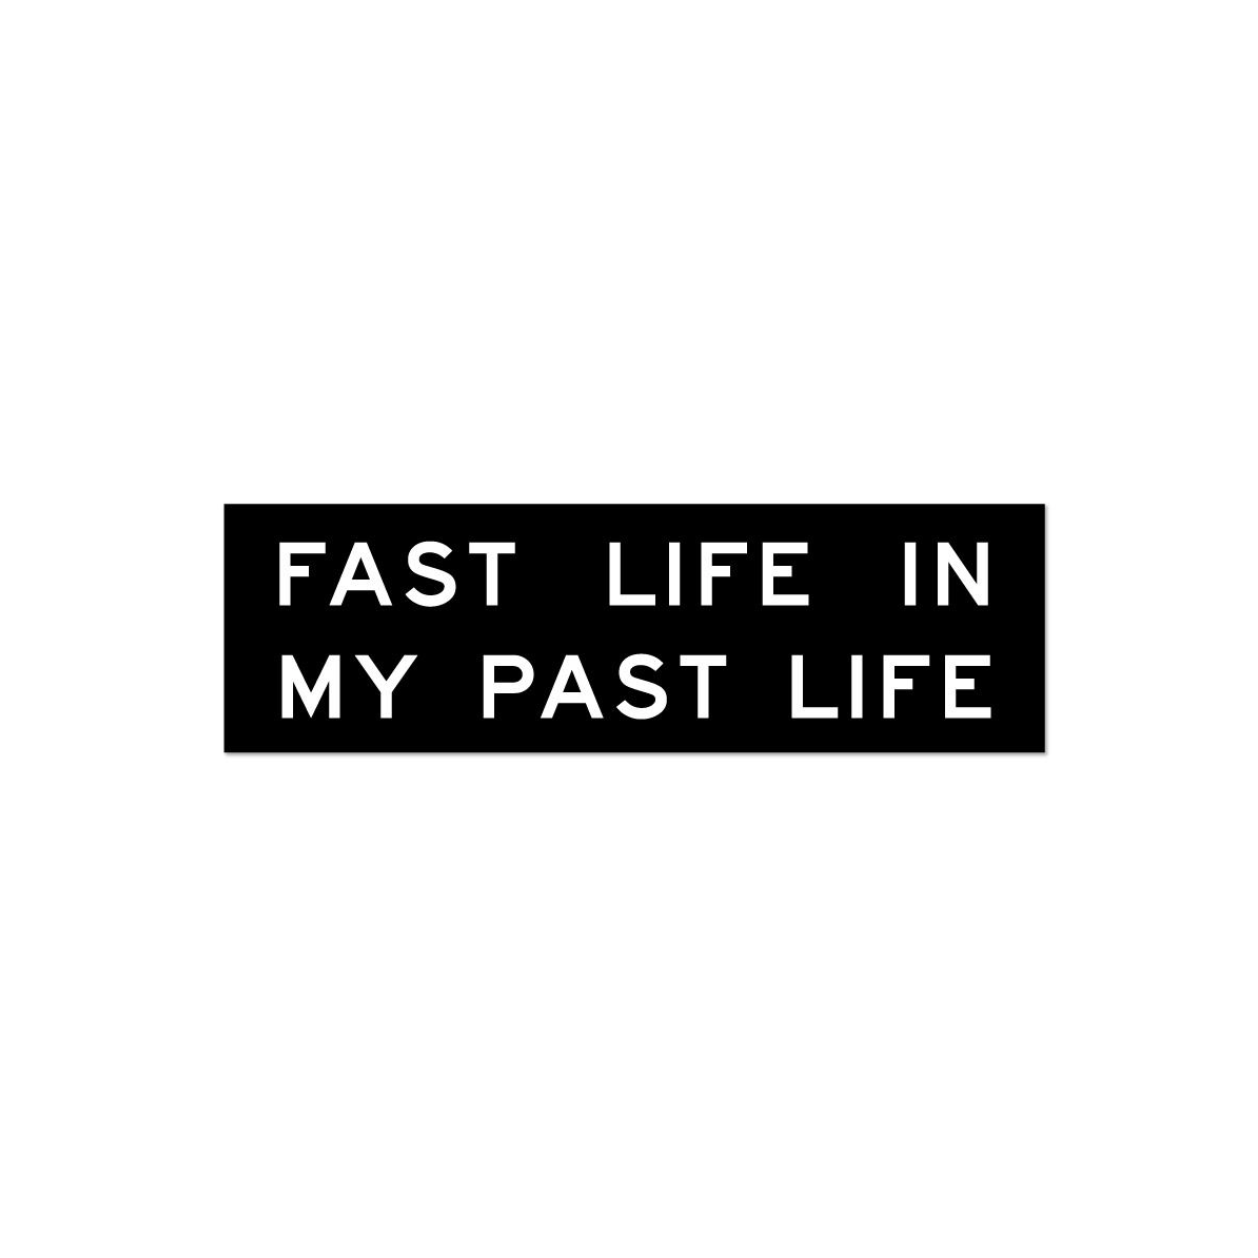 Fast Life in my Past Life